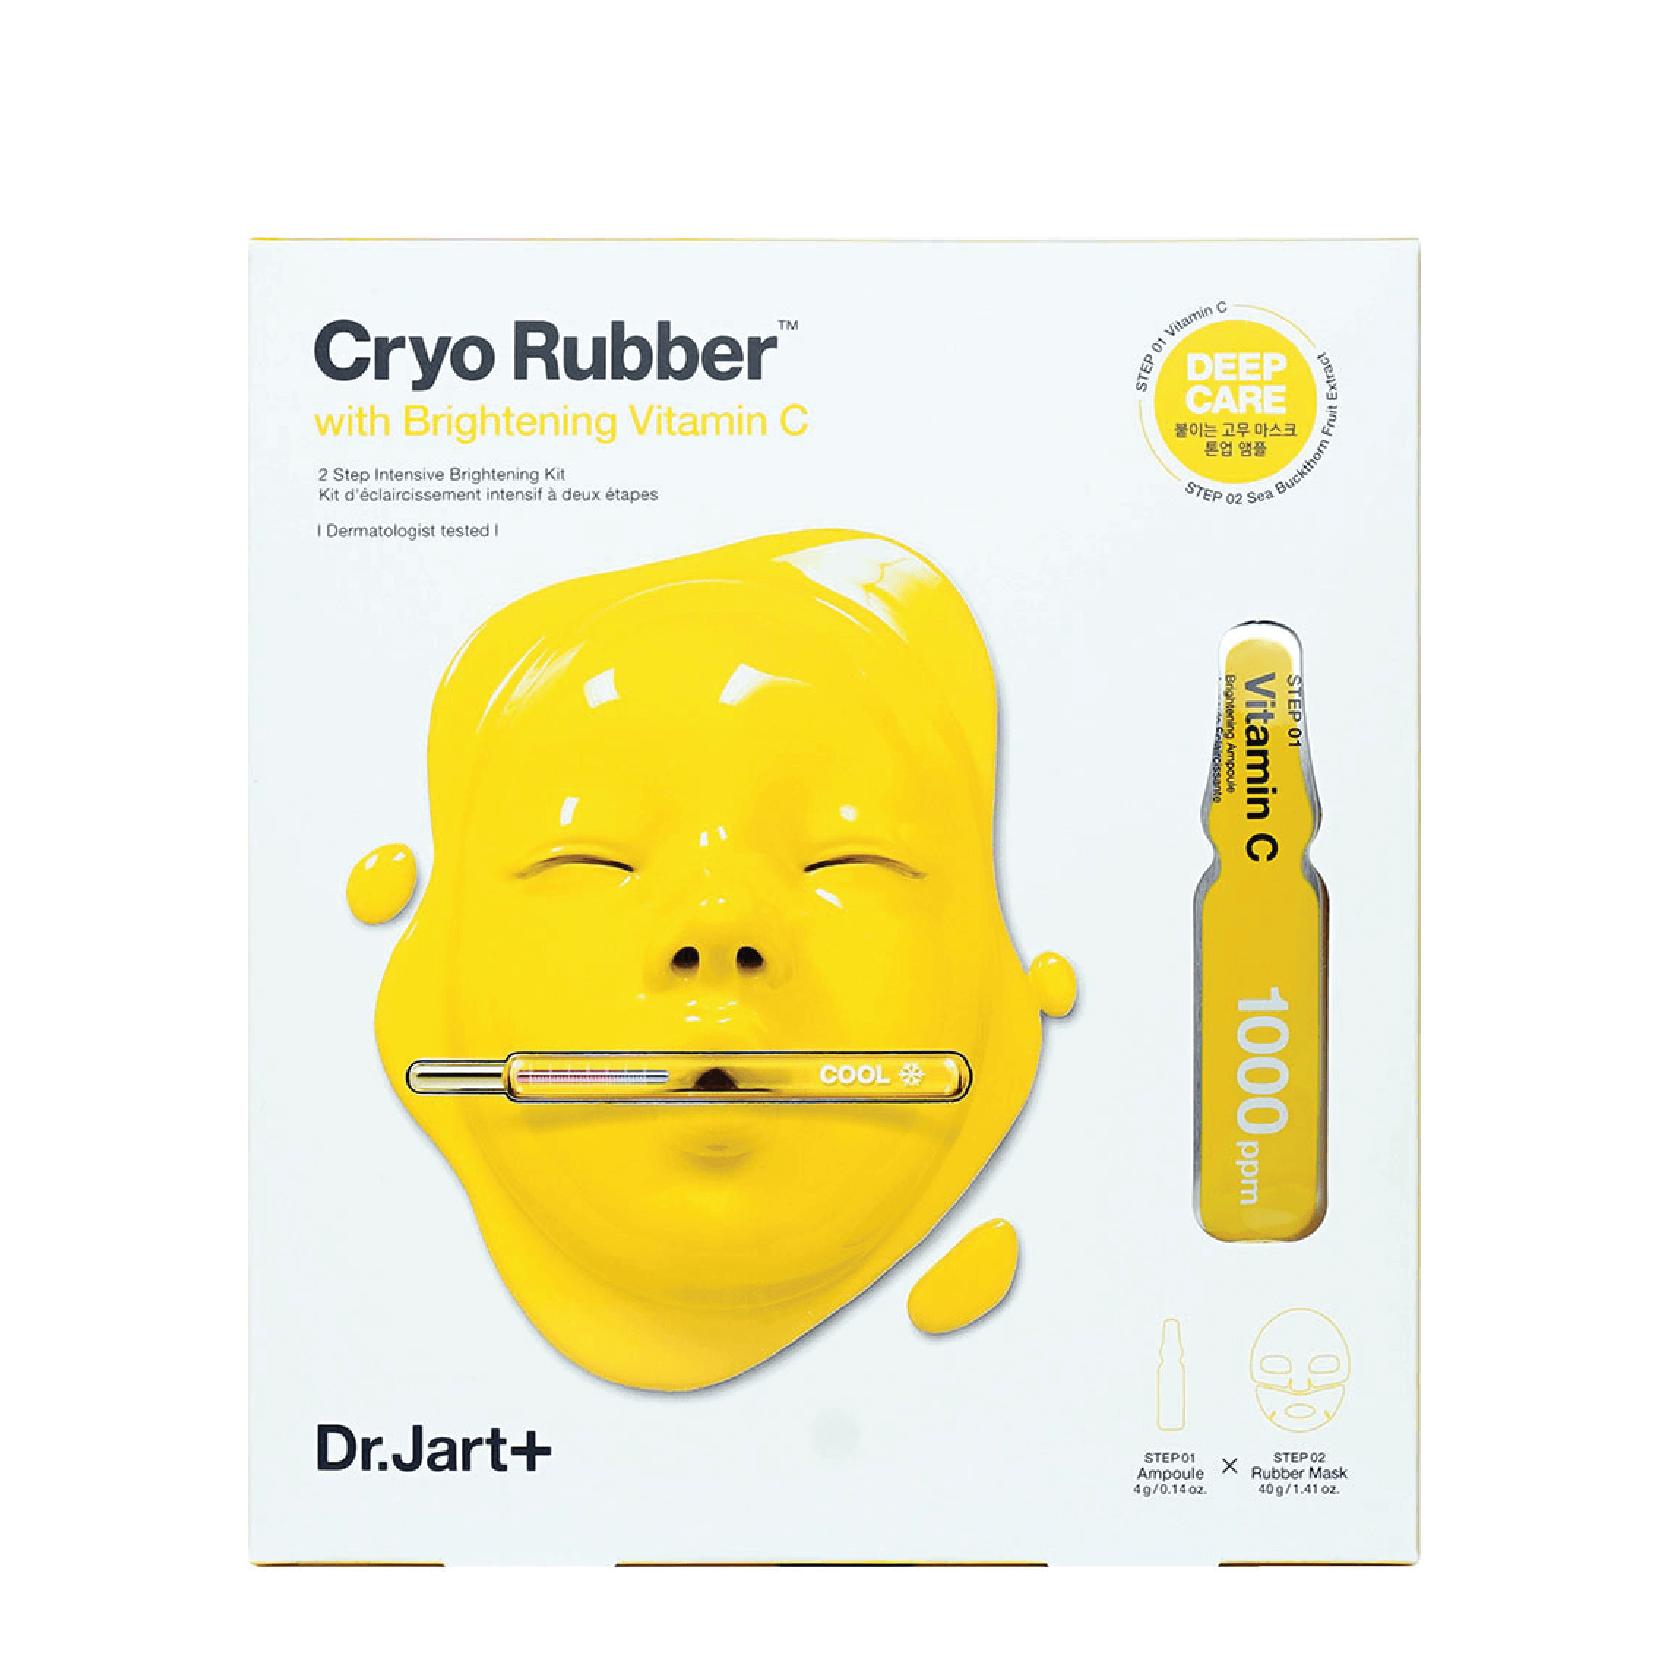 Dr. Jart+ Cryo Rubber with soothing Brightening Vitamin C Dr.Jart+